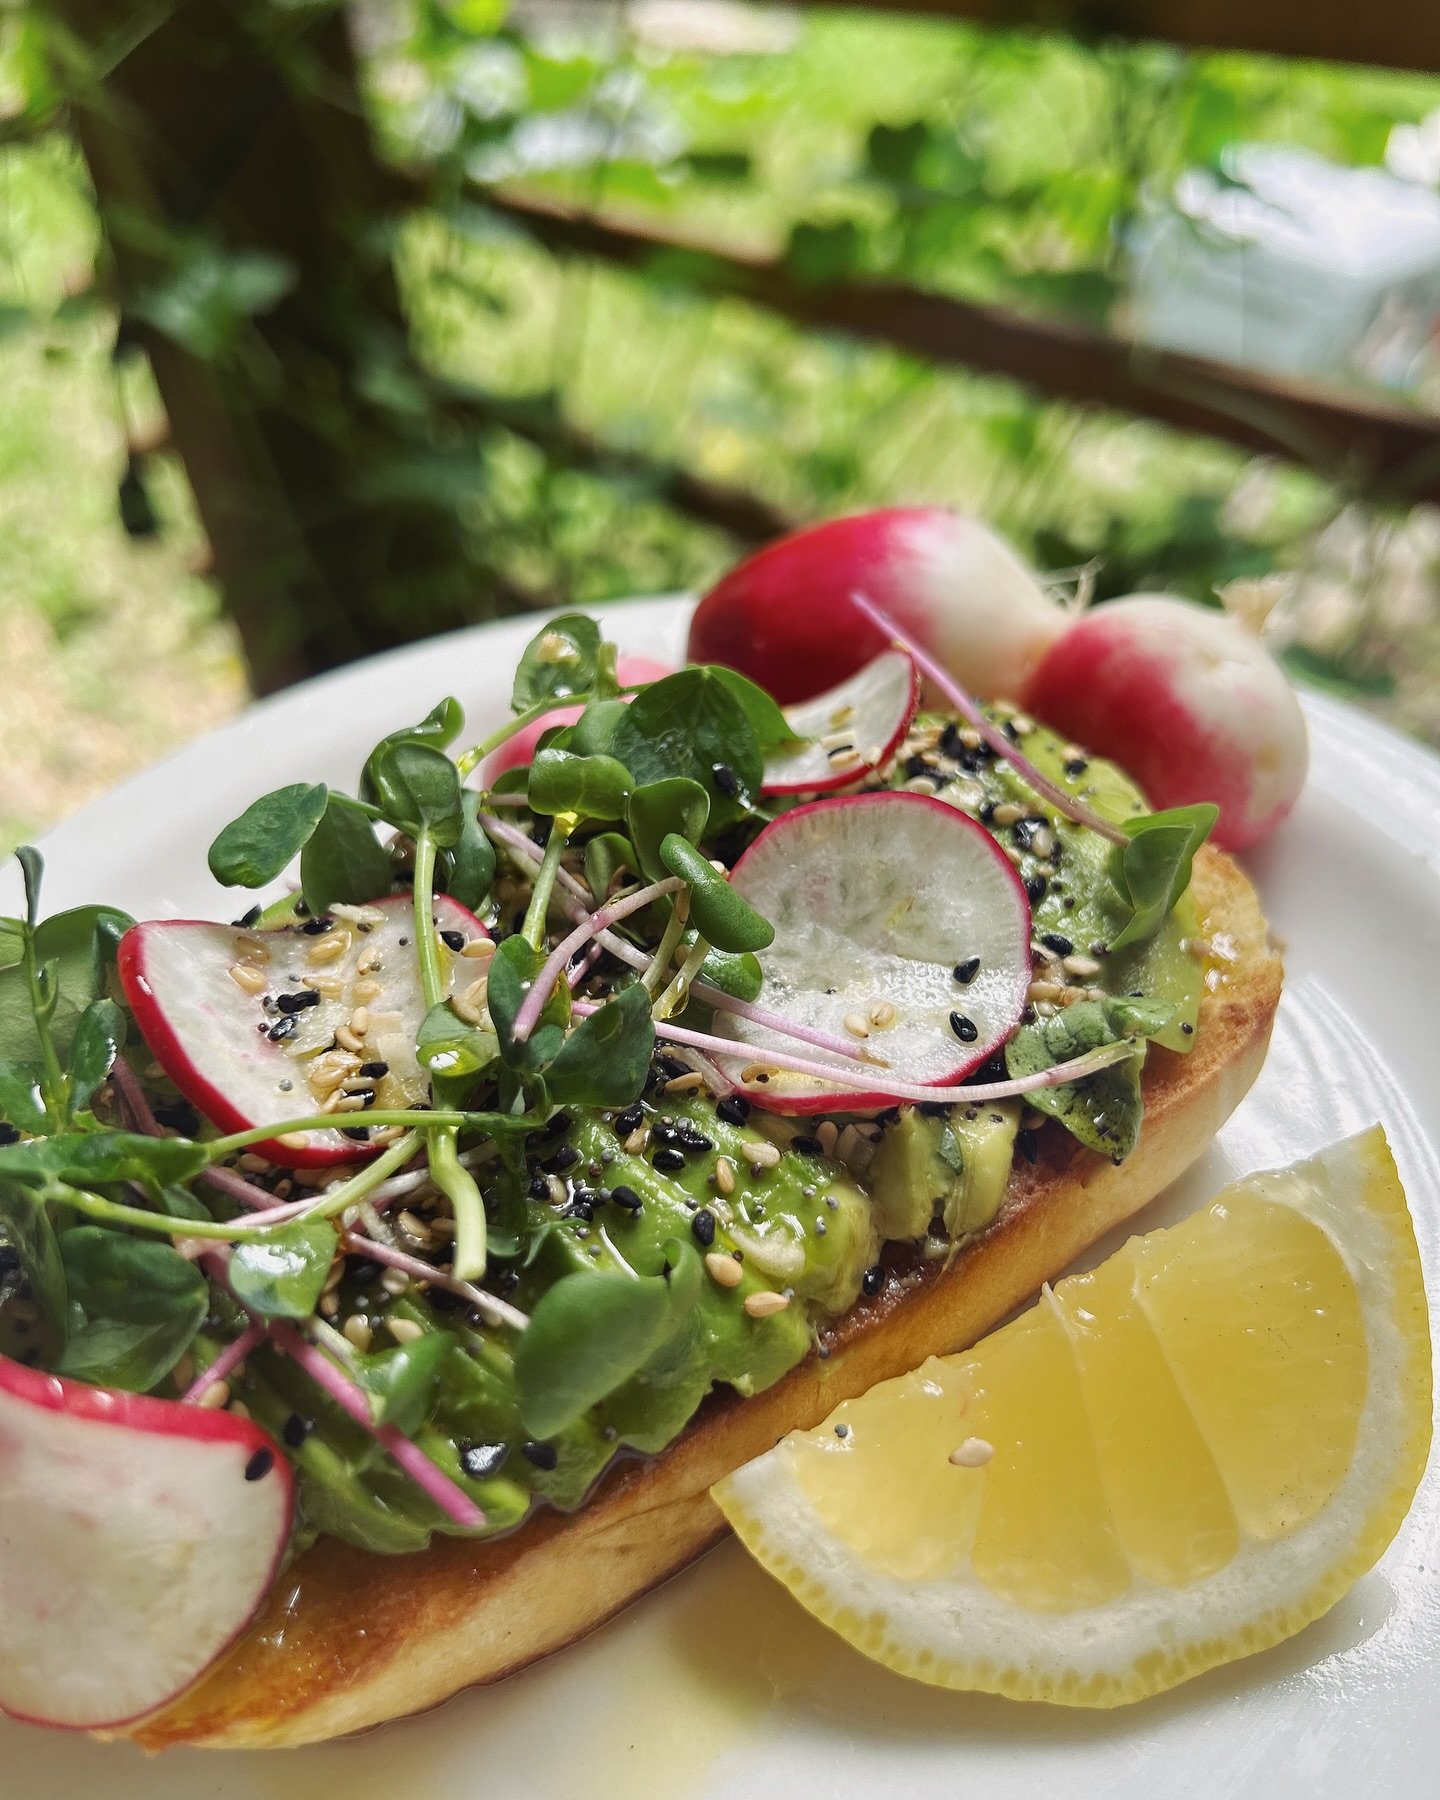 🍃 🥑 avocado toast with the most 🥑 🍃 

🥖 Thick-sliced local bread, radishes and micro greens from @villinesfarm, drizzled with EVOO and sprinkled with house everything bagel seasoning. 

🍋 We are thrilled to introduce our first menu item featuri